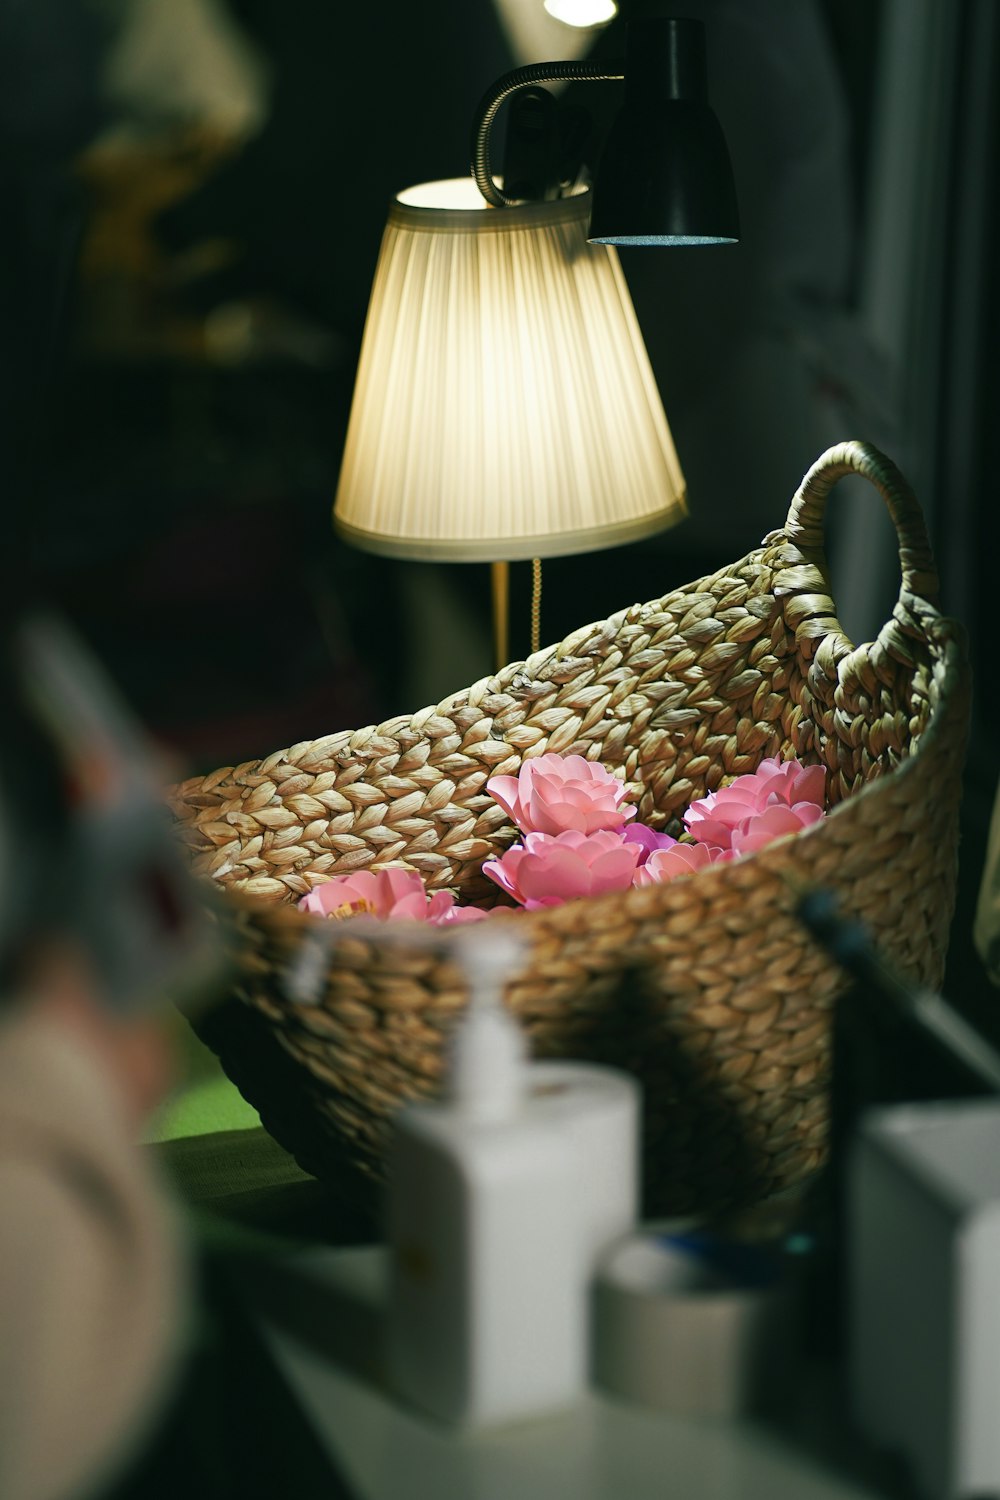 a basket with flowers in it sitting next to a lamp